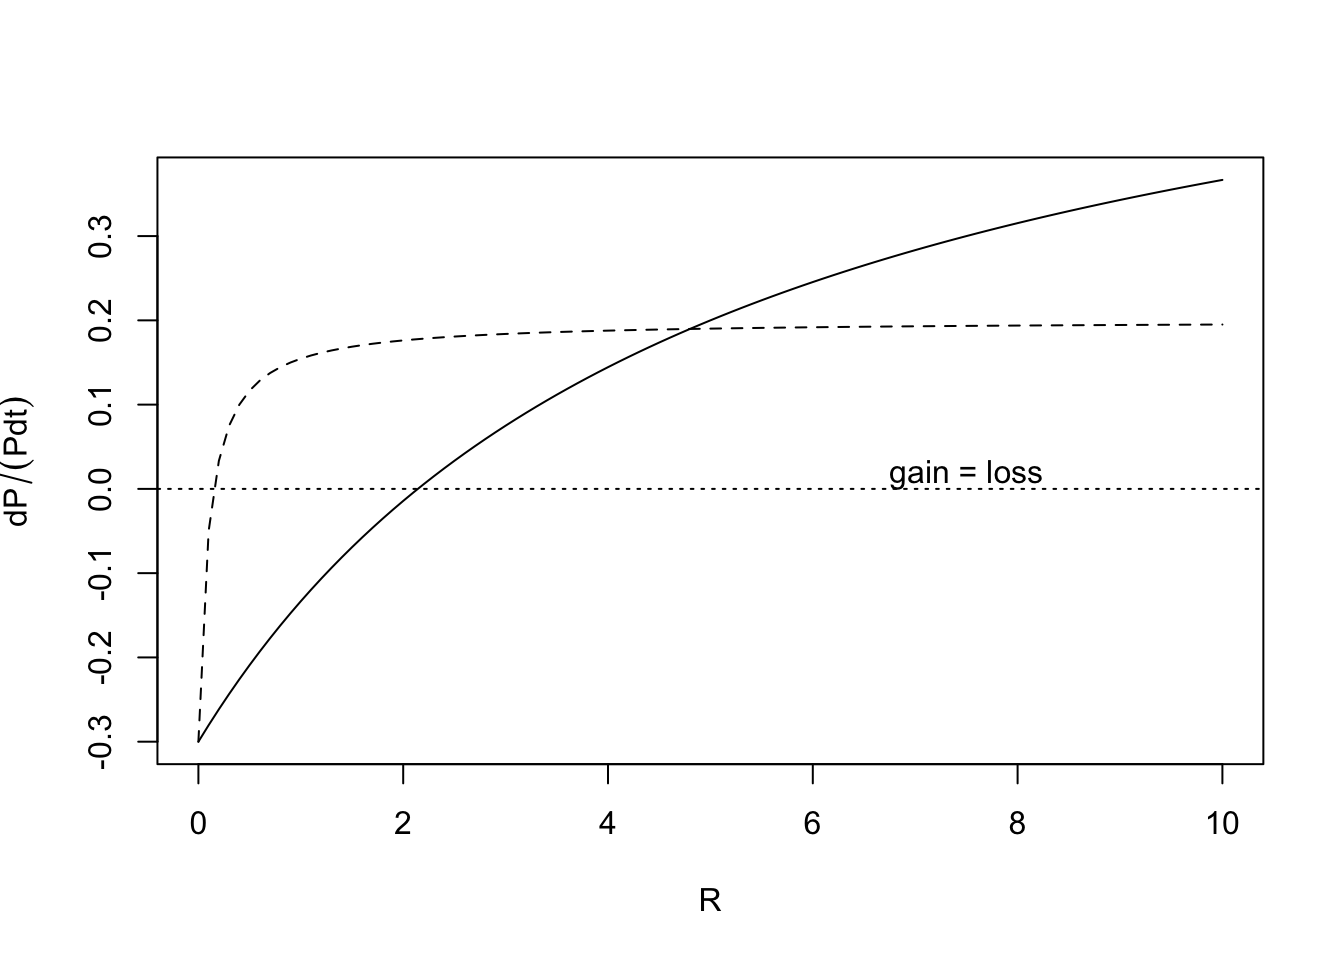 The Monod function for per capita resource-dependent growth rates of two different populations. These are a type II functional responses.